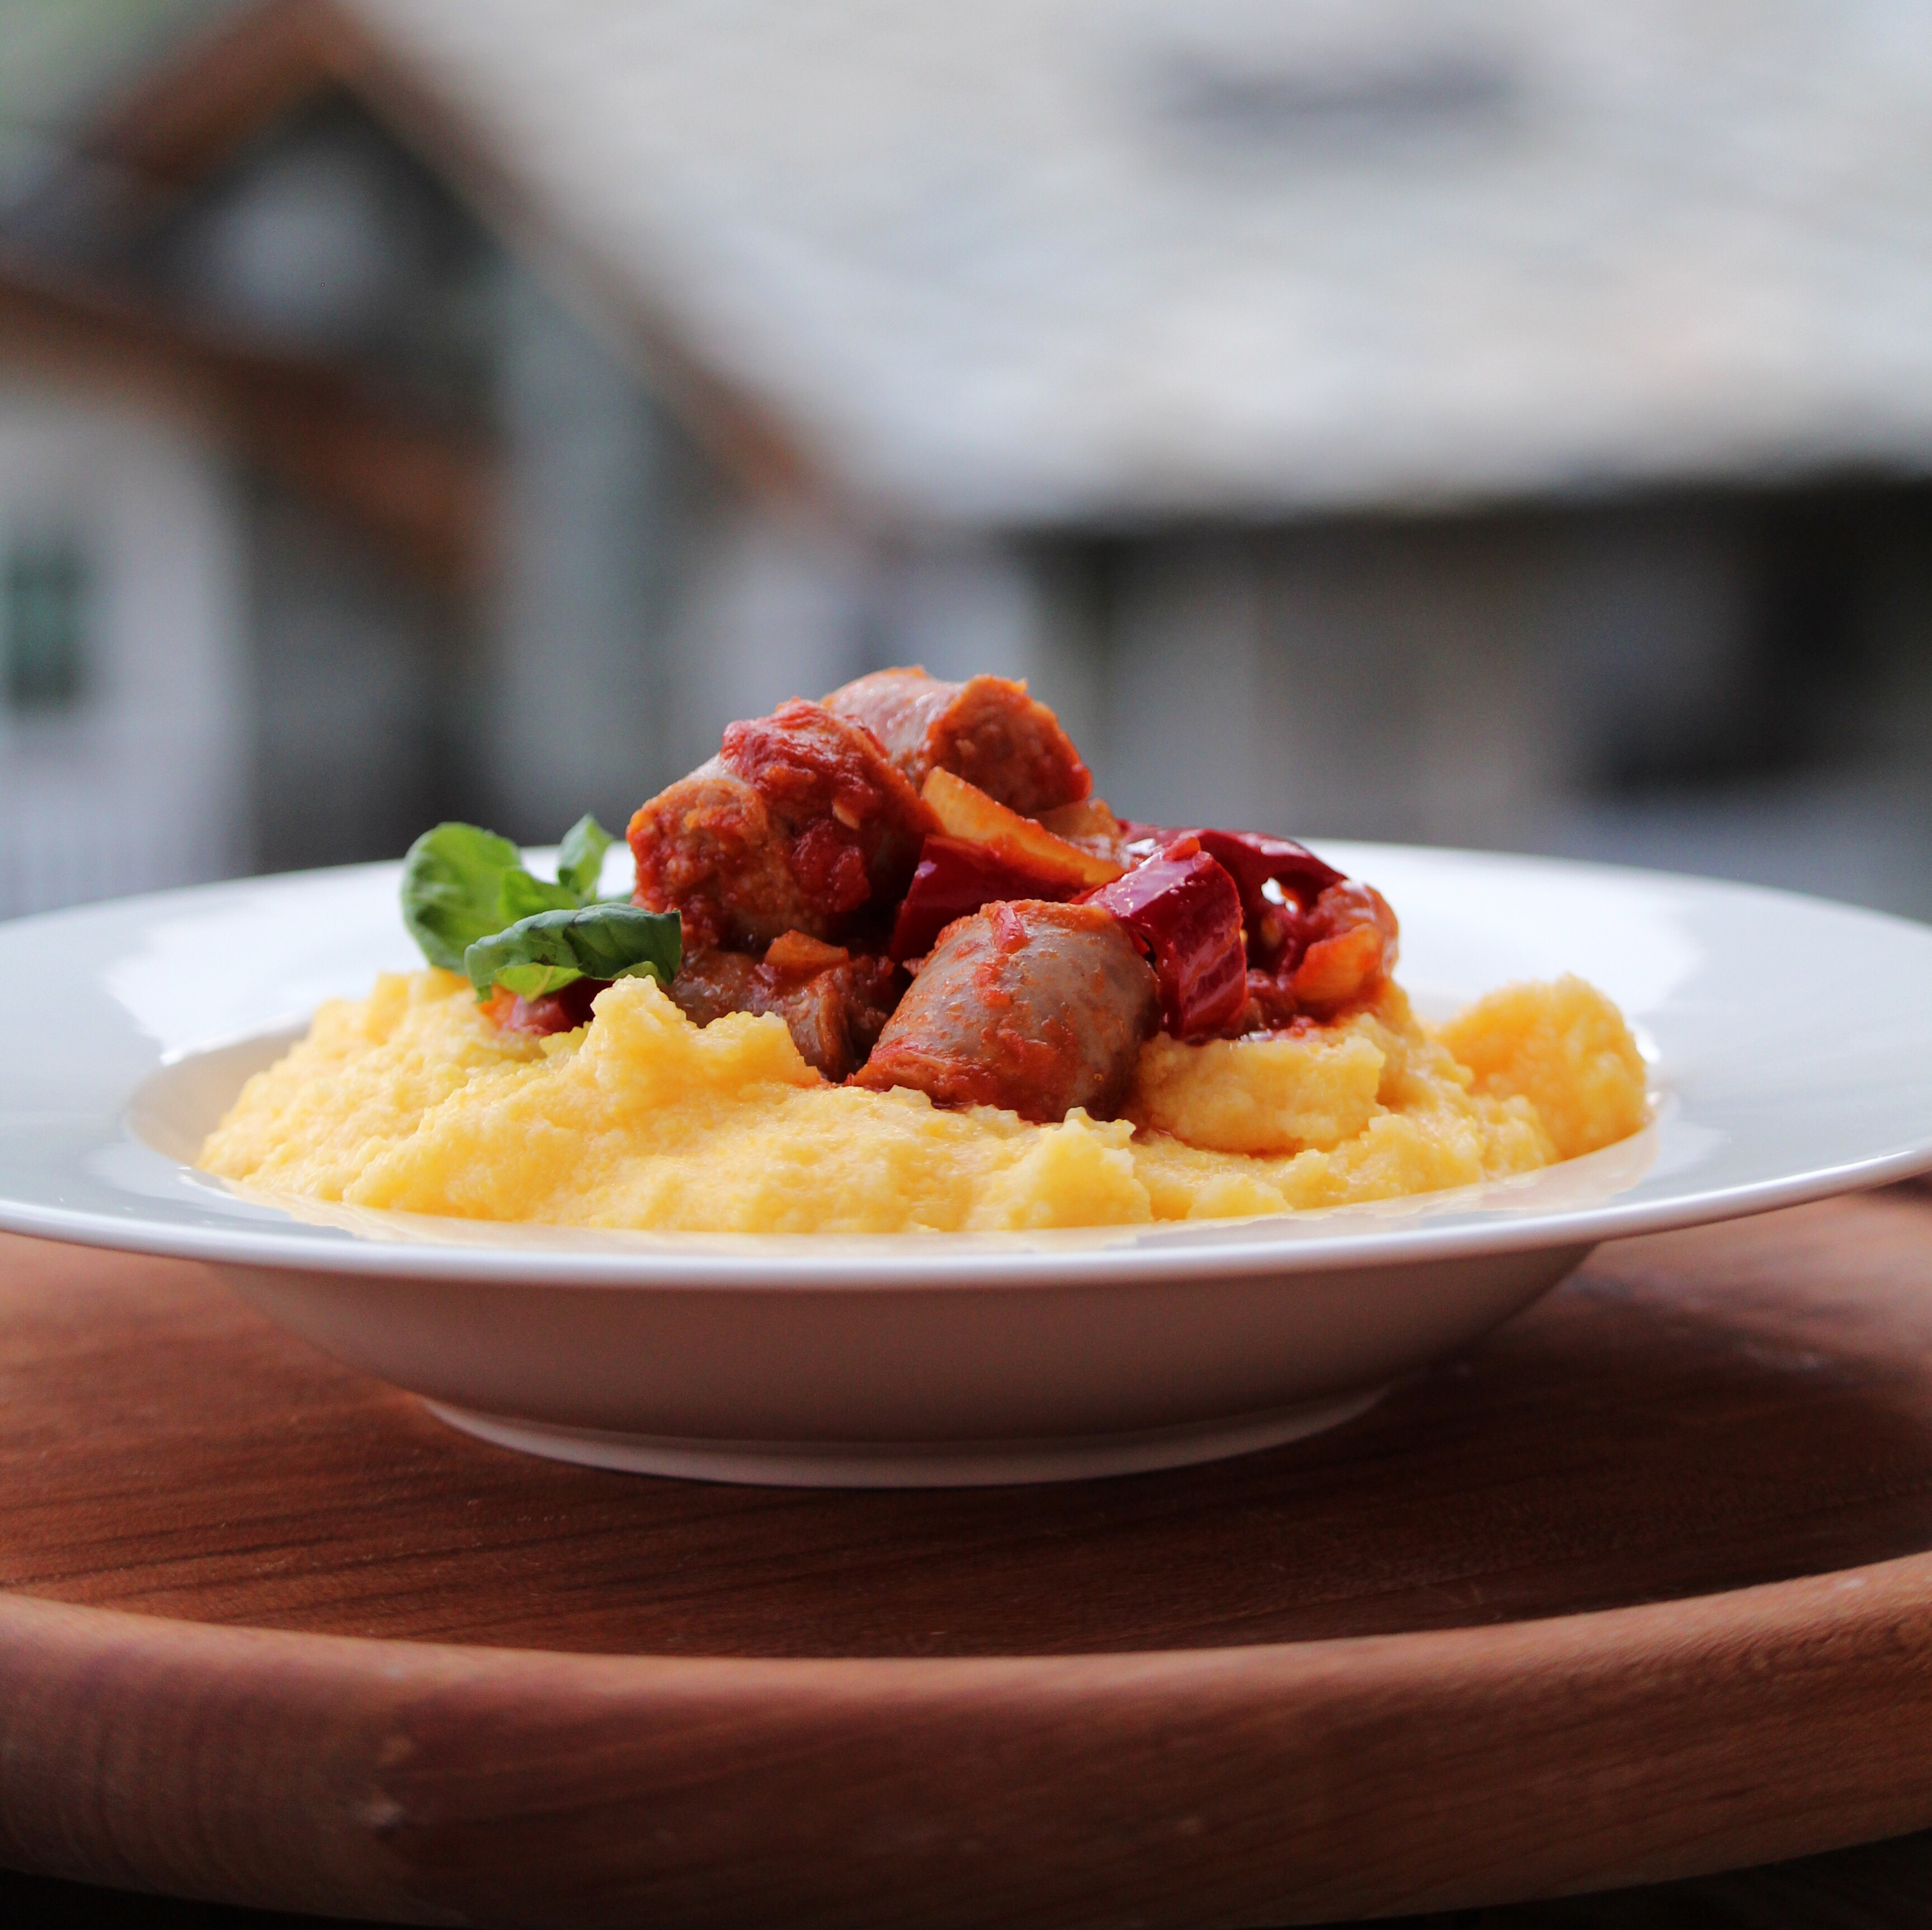 Sausage and Peppers over Creamy Parmesan Polenta